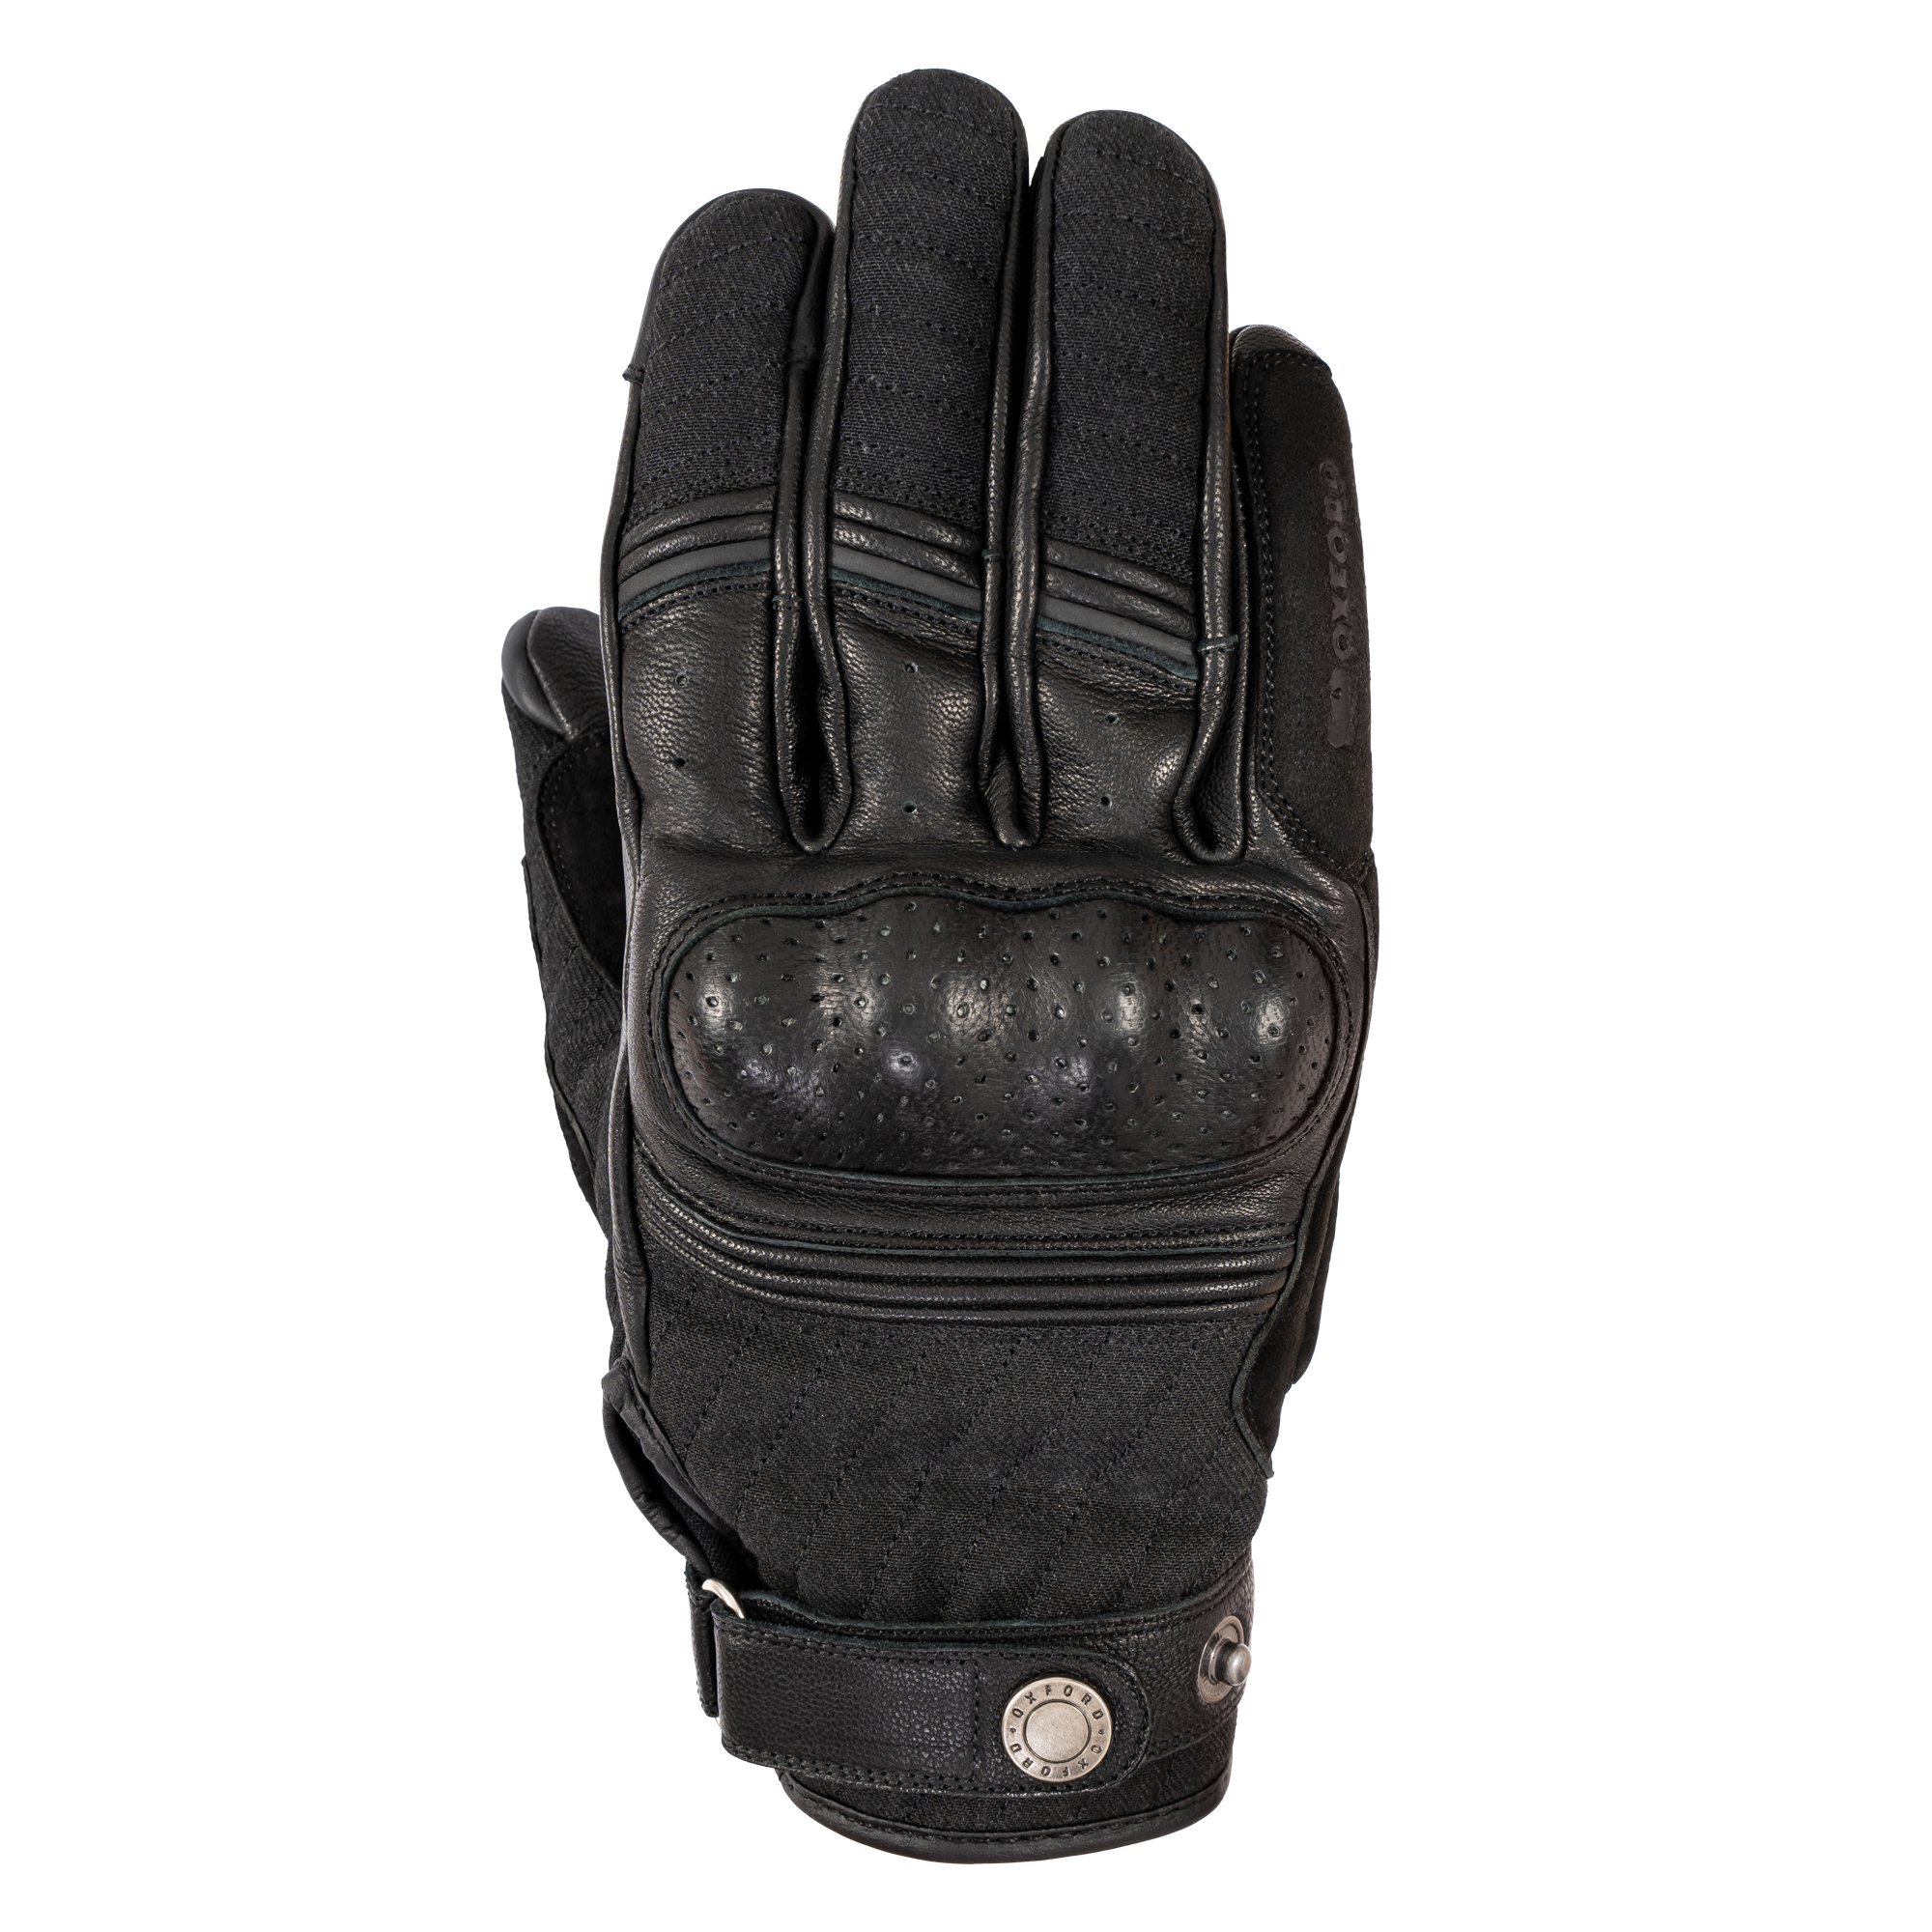 Oxford Hardy MS Glove Black : Oxford Products